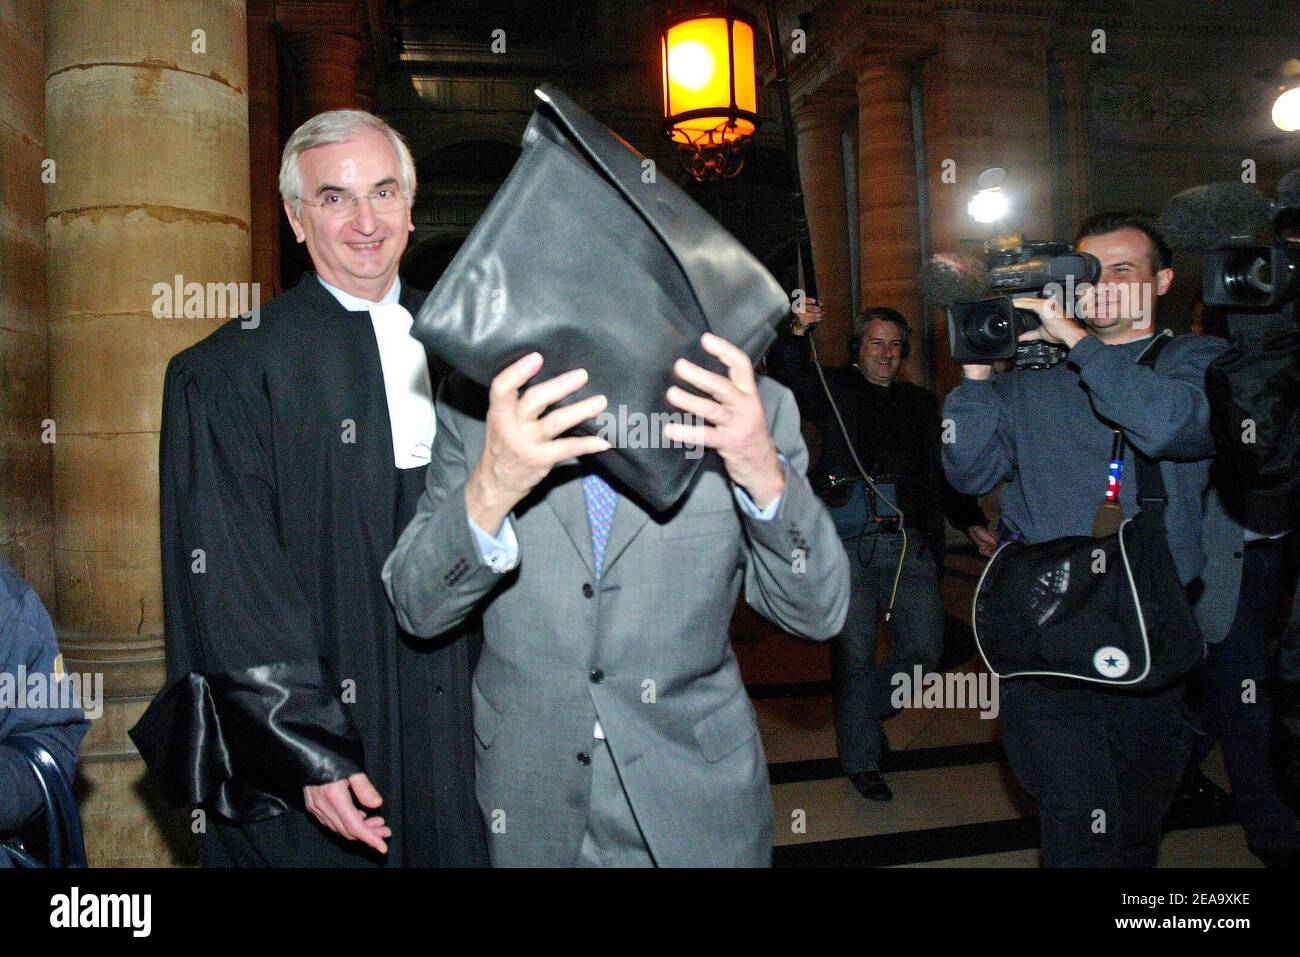 Jean-Charles Marchiani's associate Yves Manuel, arrives to the magistrates' court in Paris, France, on October 3, 2005. Manuel appears with French prefect and former European Parlement member Jean-Charles Marchiani, former right-hand man of the French government for secret missions, for a 1.25 million euro contract signed in the 90's between the French weapon company Giat Industries and the German company Renk. Photo by Mehdi Taamallah/ABACAPRESS.COM Stock Photo